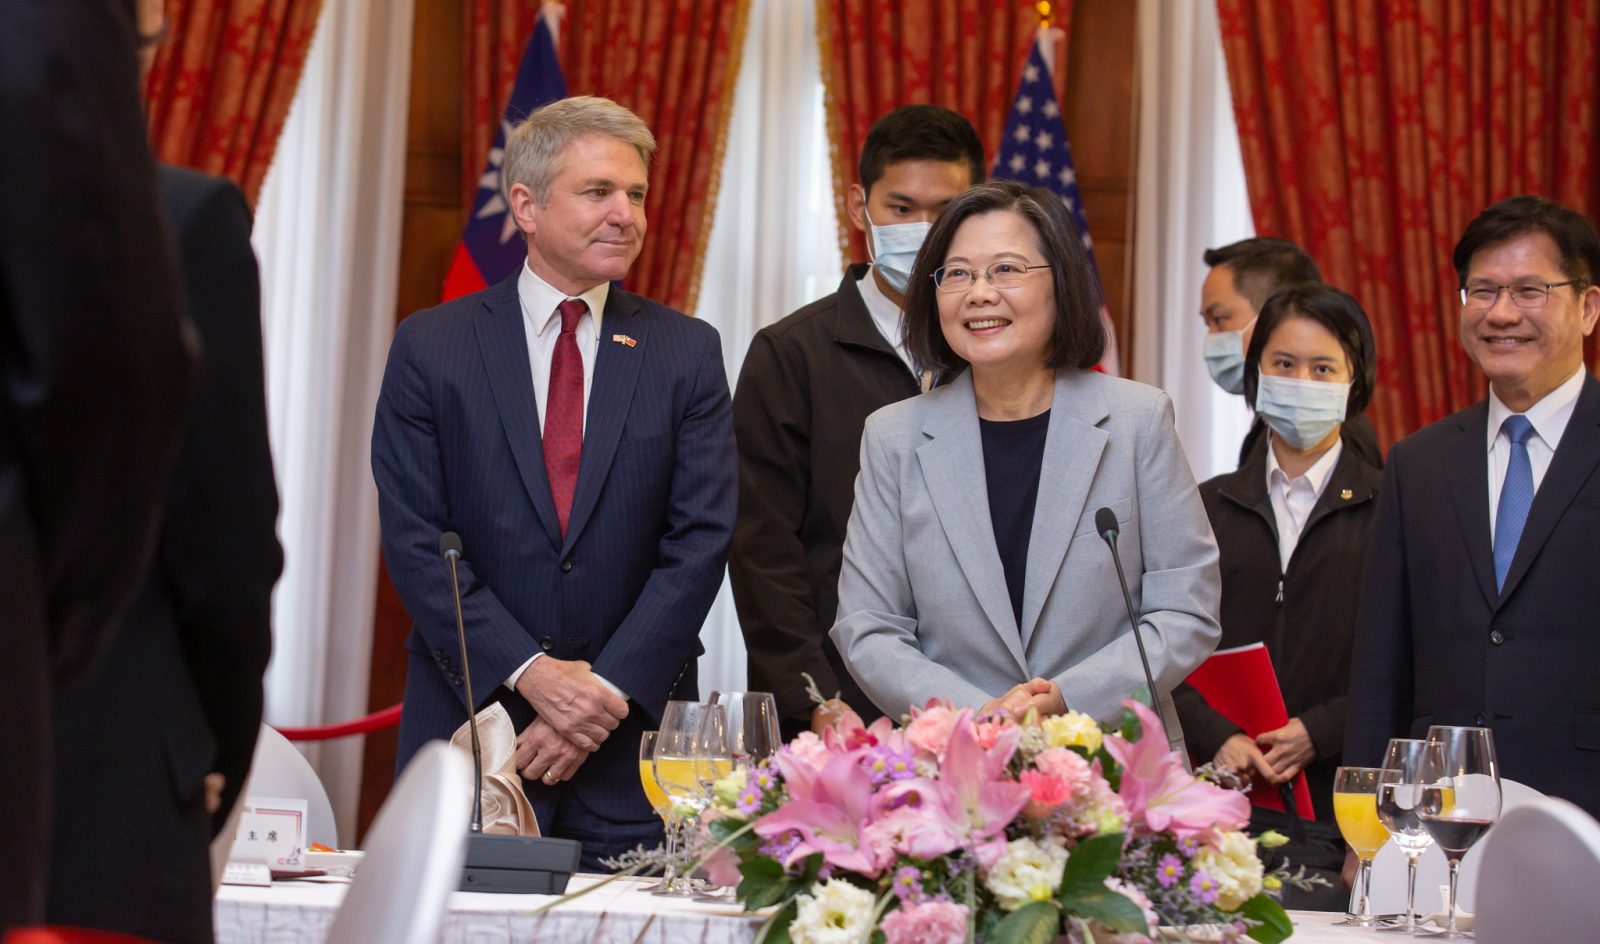 epa10564618 A handout photo provided by the Taiwan Presidential office shows, Taiwan President Tsai Ing-wen (R) next to US Lawmaker Michael McCaul (L), during their meeting in Taipei, Taiwan, 08 April 2023. Taiwan President Tsai Ing-wen meets visiting U.S. Lawmakers amidst China’s military drills around Taiwan and flew dozens of planes across the Taiwan Strait median line on 08 April, following the Taiwan president’s visit to the United States.  EPA/WANG YU CHING/TAIWAN PRESIDENTIAL H  HANDOUT EDITORIAL USE ONLY/NO SALES